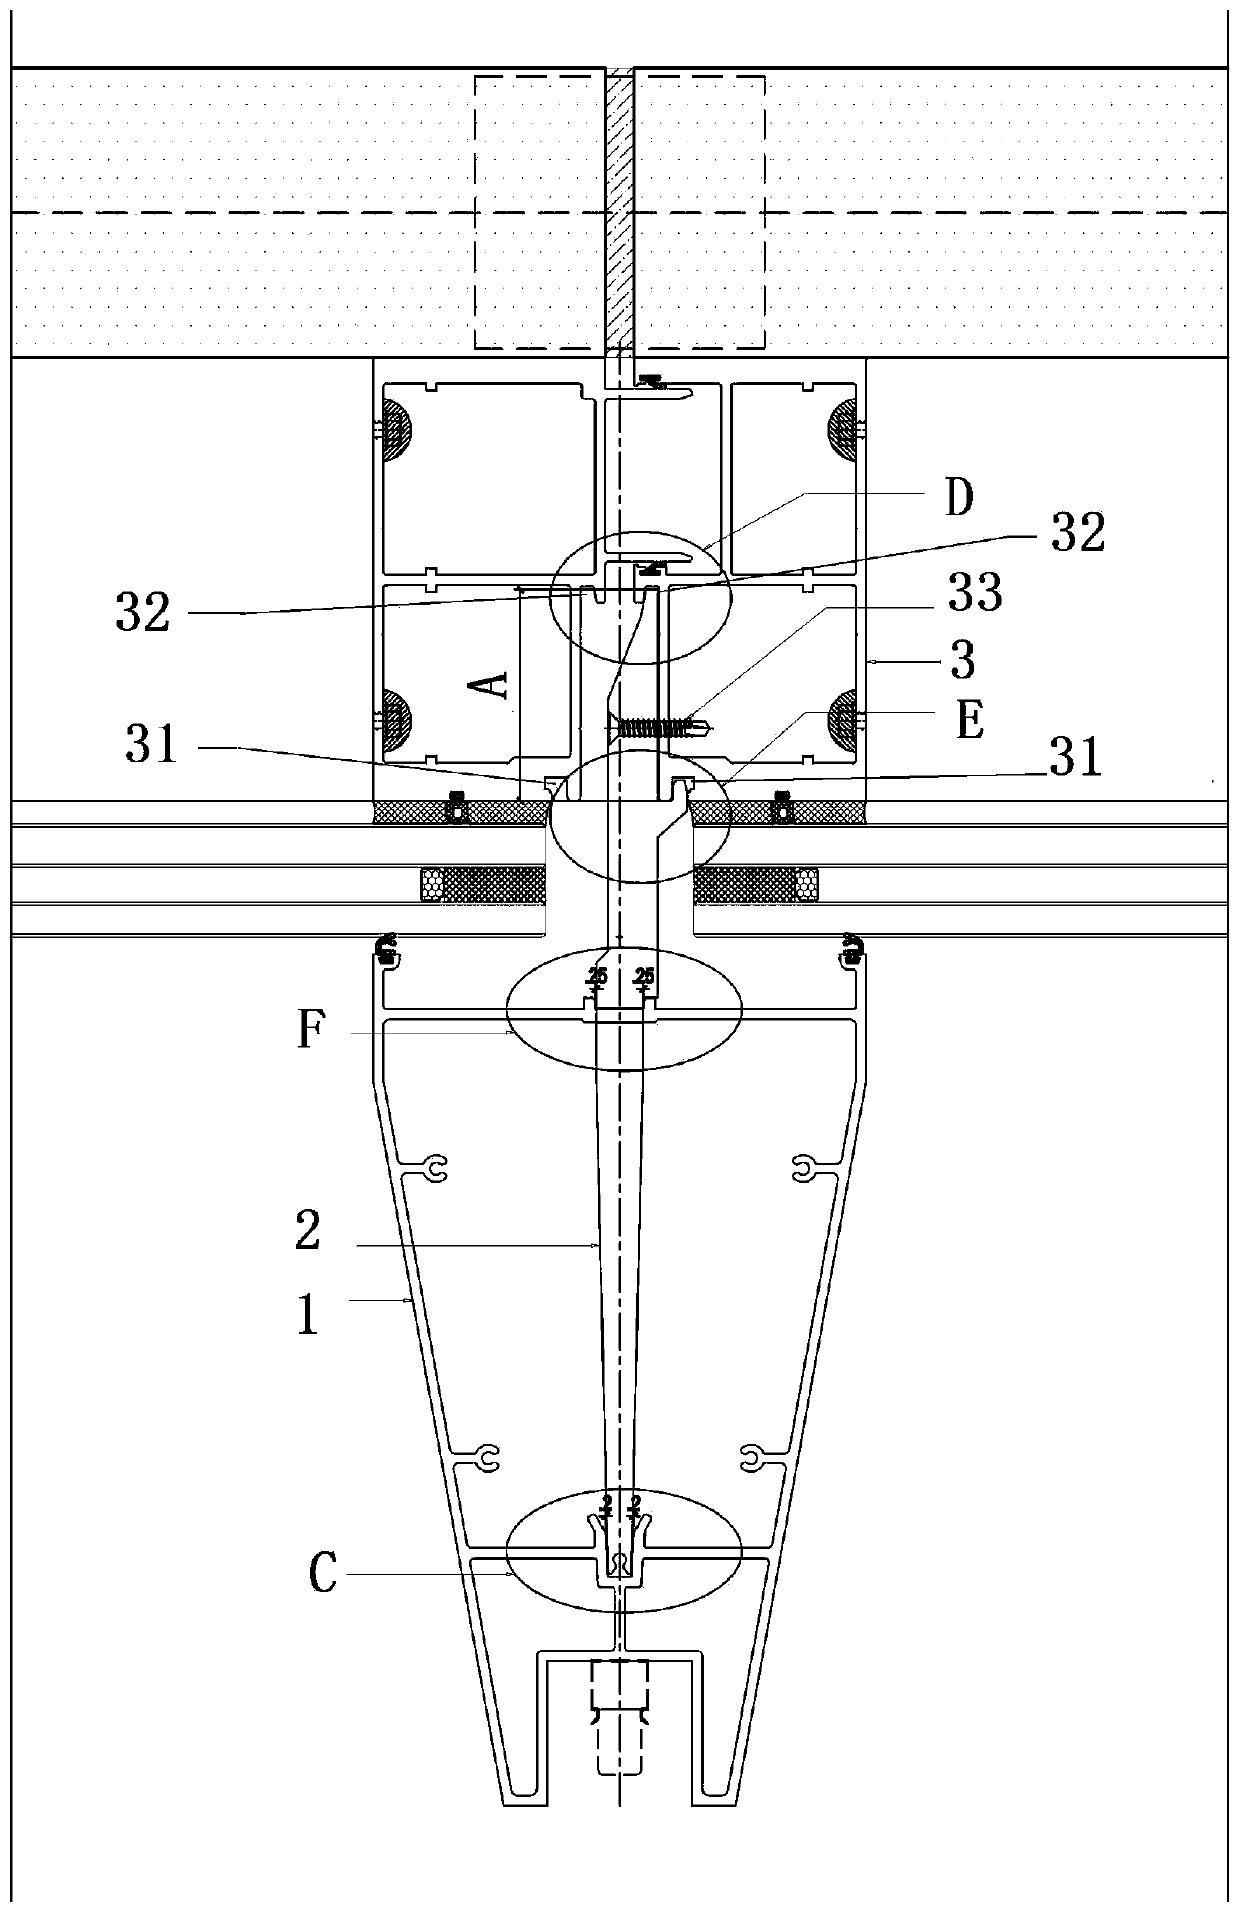 Decorative strip system firm in connection and simple in structure